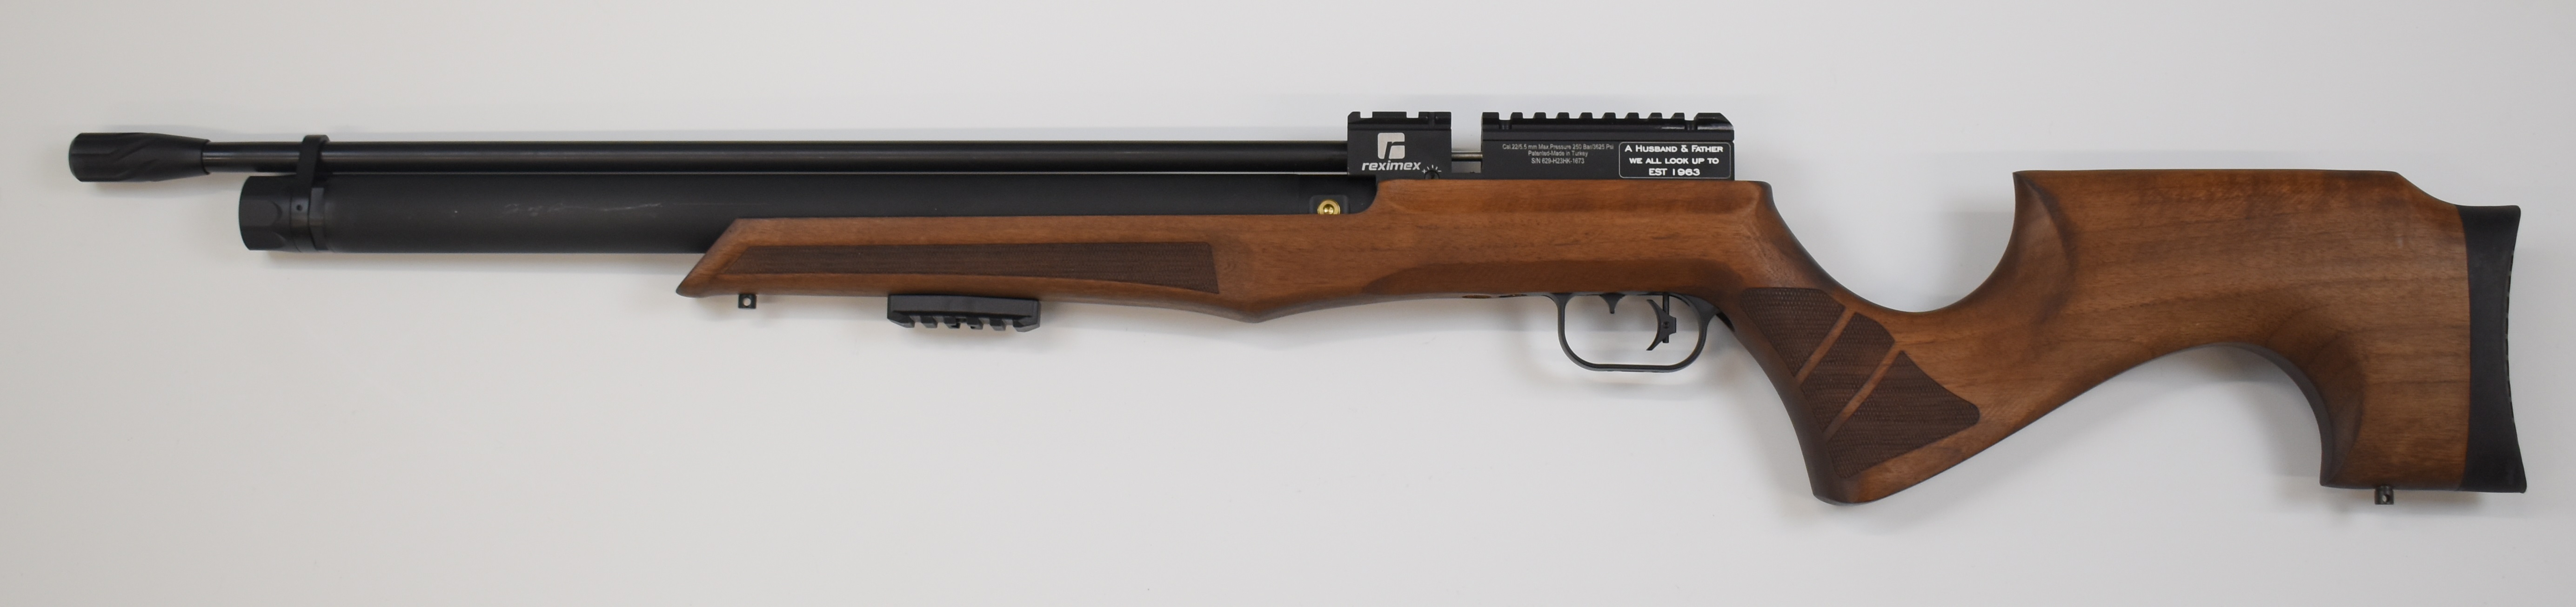 Reximex LYRA .22 PCP air rifle with chequered semi-pistol grip, adjustable trigger, 12-shot magazine - Image 7 of 12